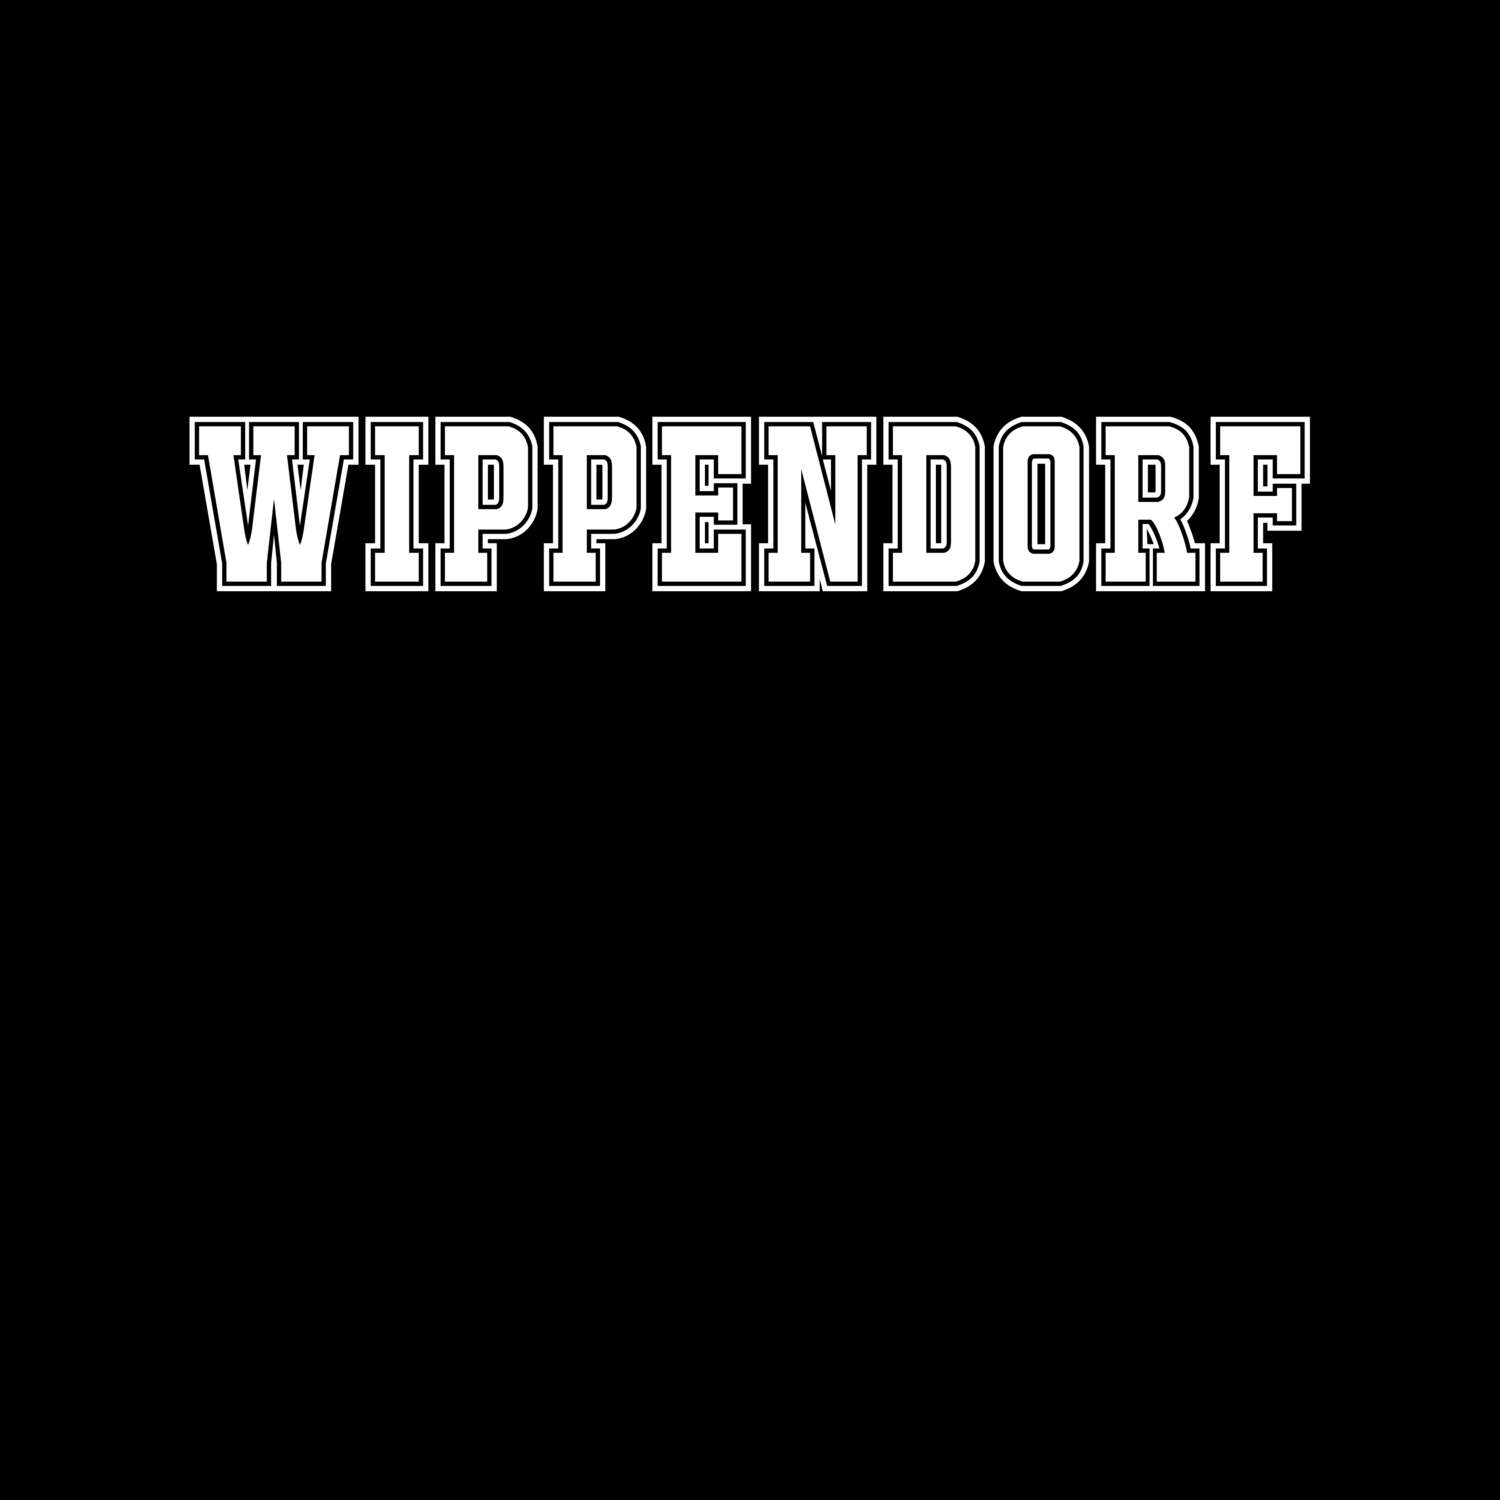 Wippendorf T-Shirt »Classic«